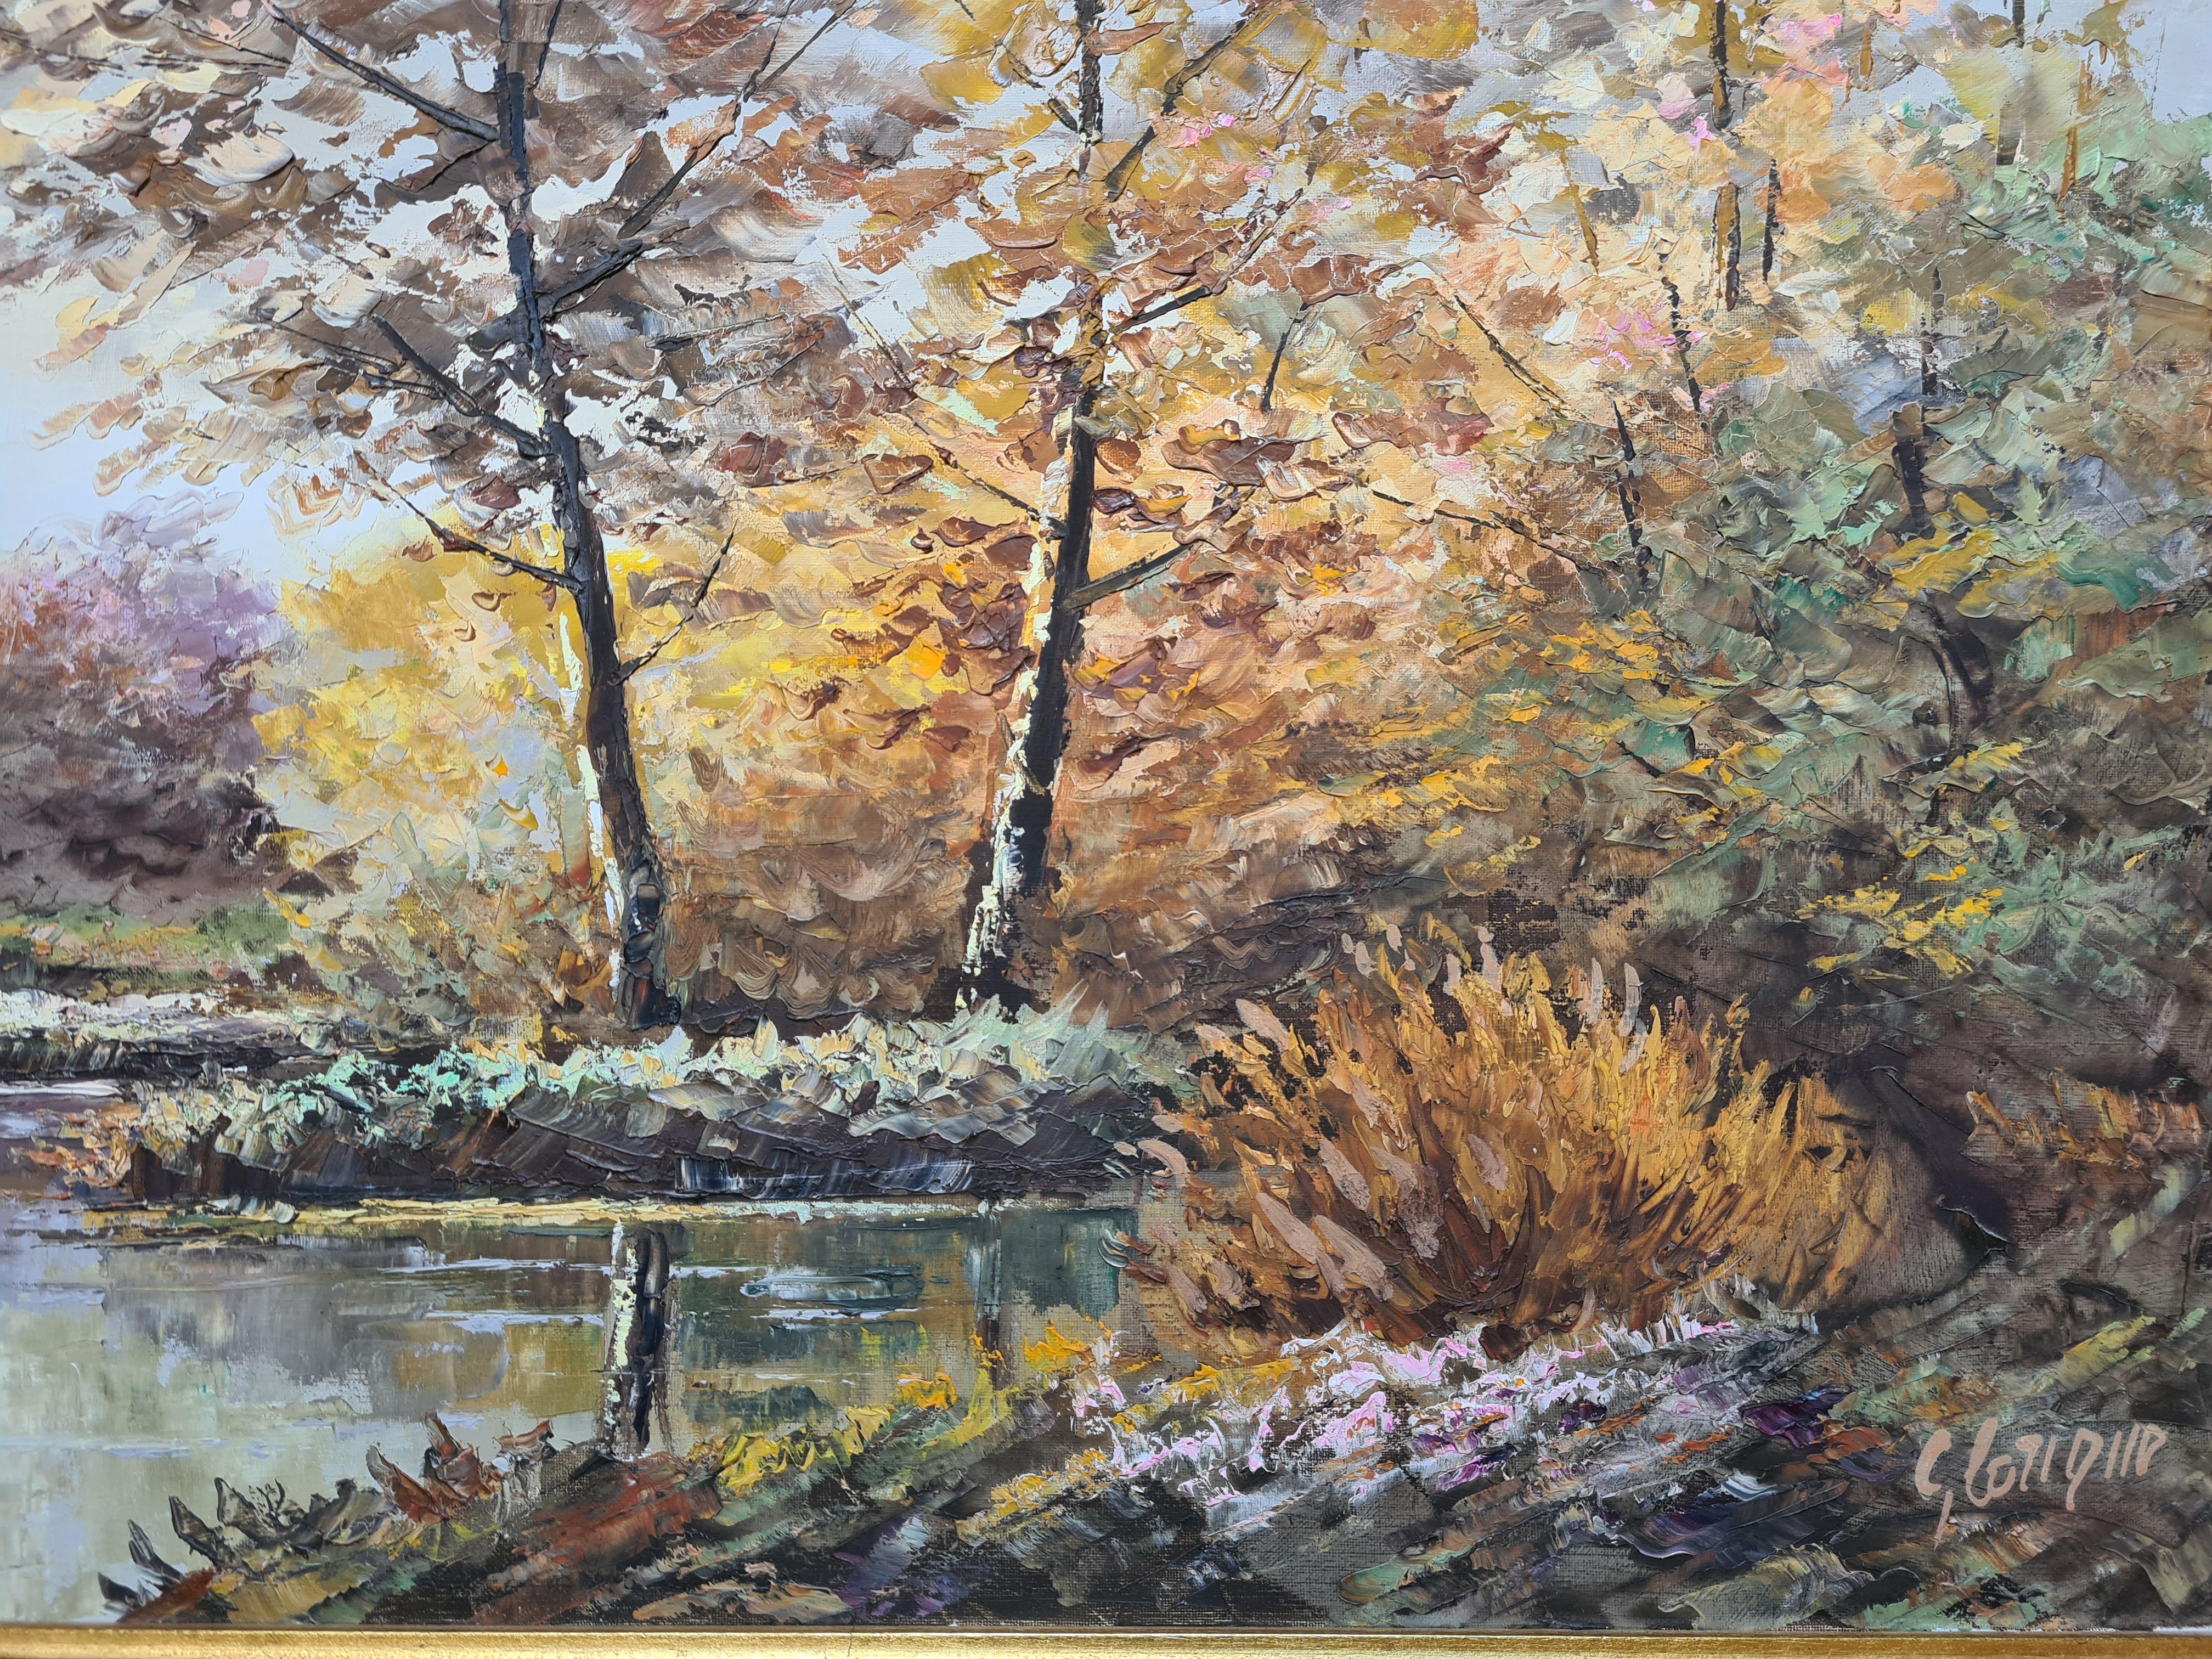 A French oil on canvas landscape of a autumn riverscape by G Lorique. The painting is signed bottom right and presented in a wood frame with gilt filet.

Lorique has captured all the charm of a lazy, early autumn day at the riverbank. He has played